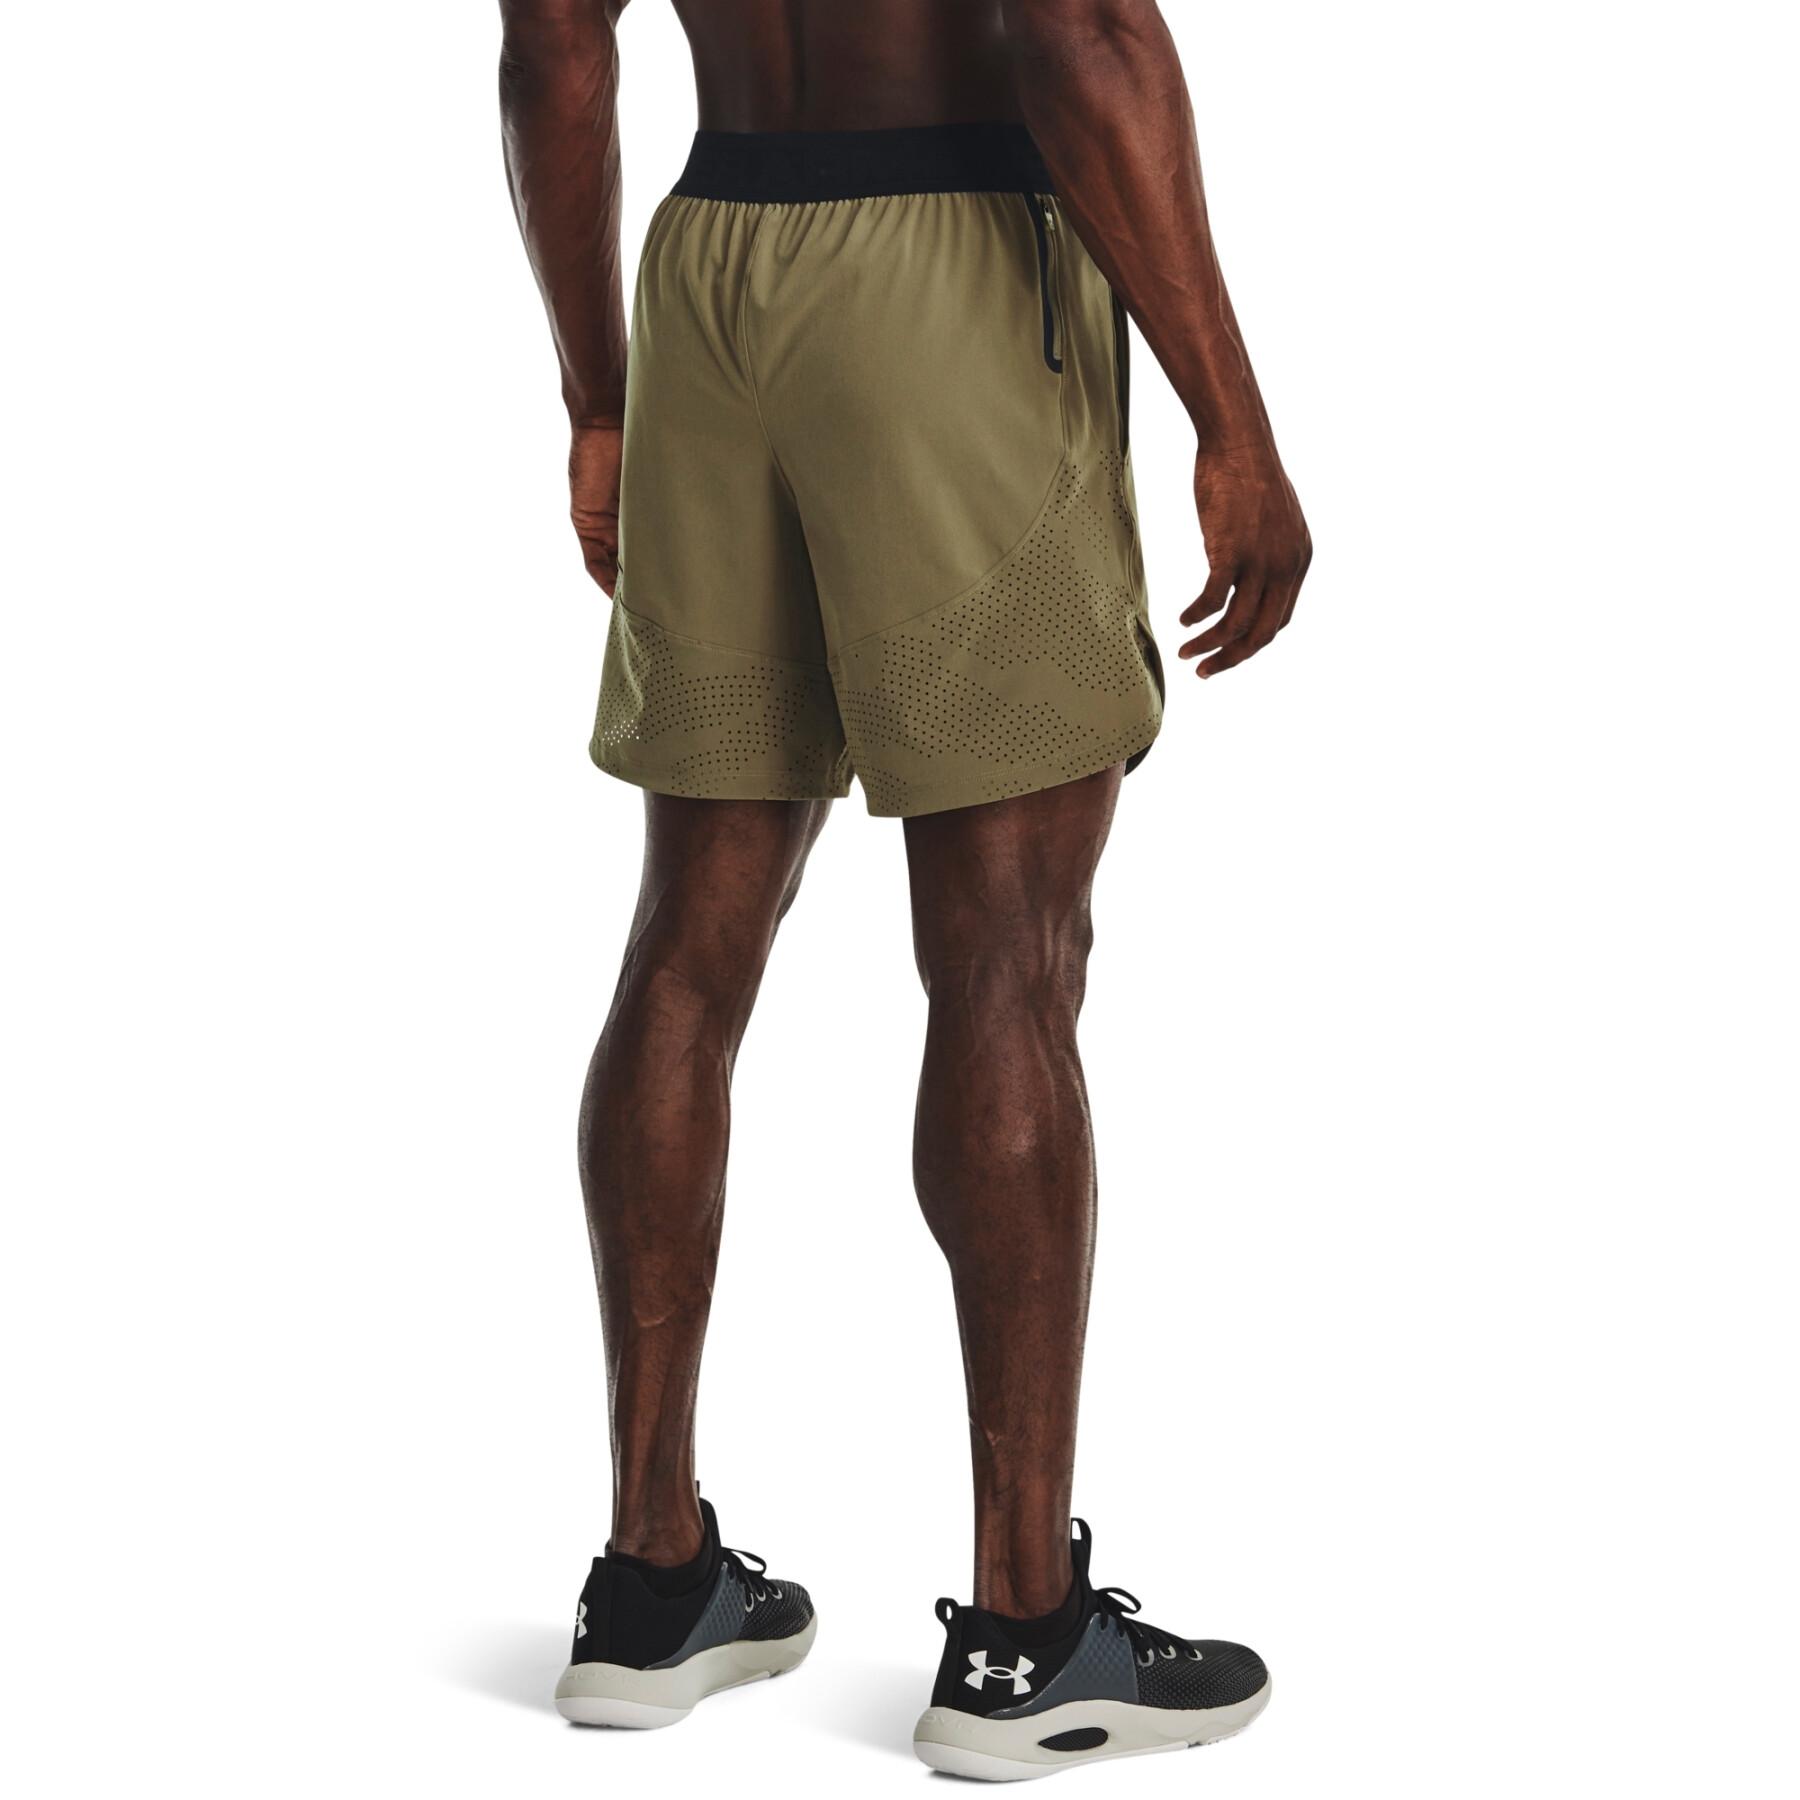 Woven shorts Under Armour Stretch - Shorts - Men's Clothing - Fitness